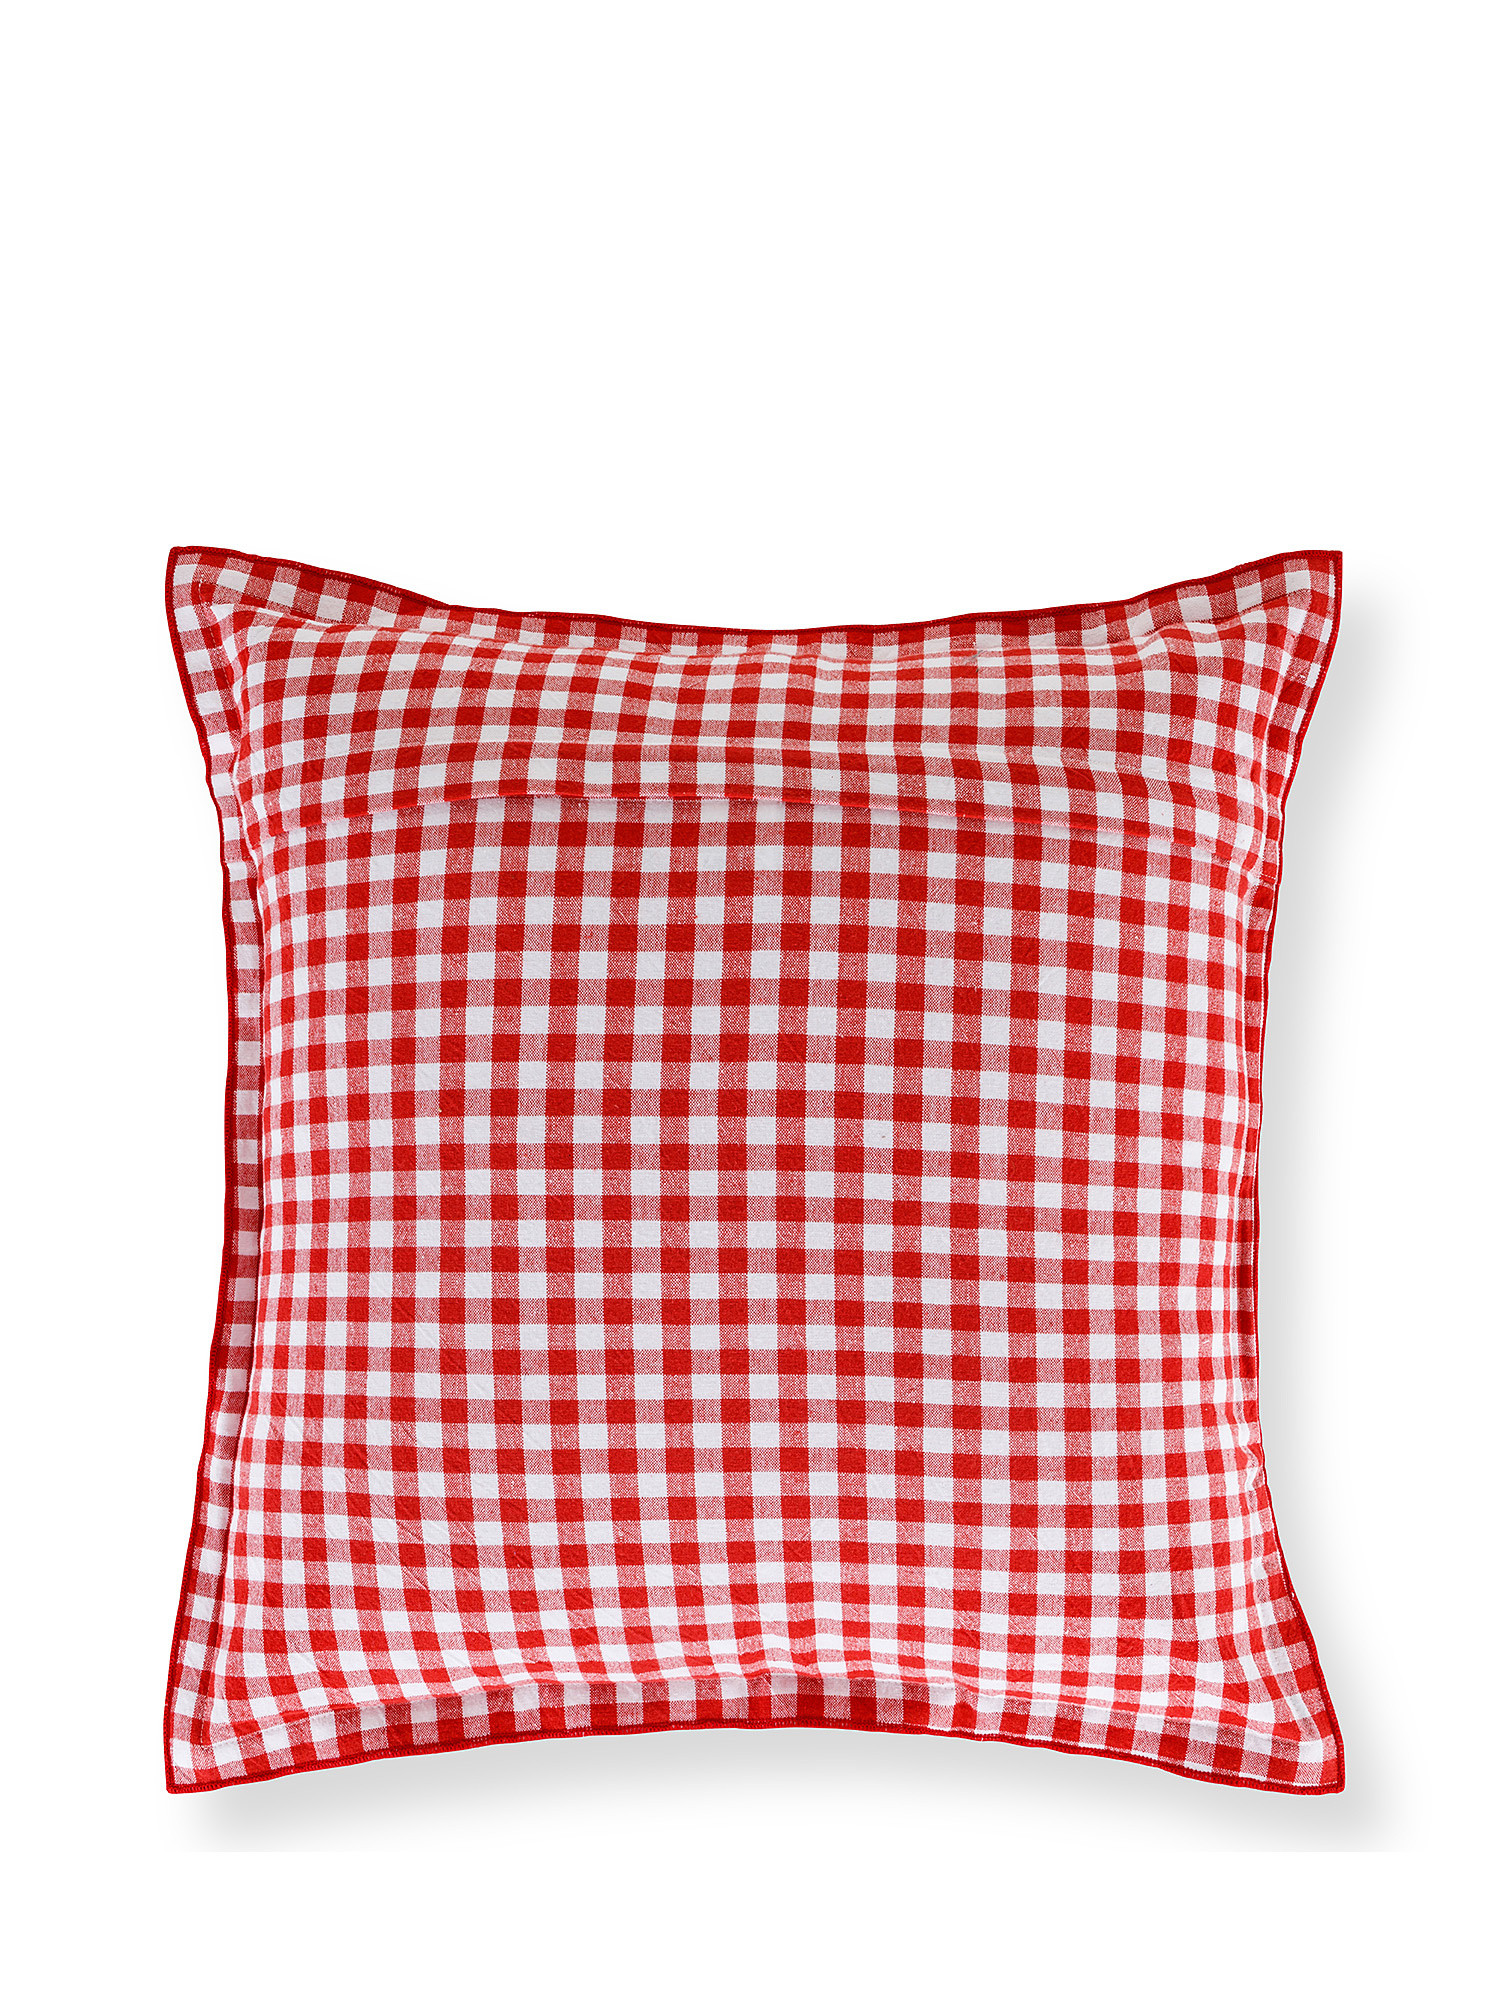 Cotton cushion with vichy motif 45x45cm, Red, large image number 1